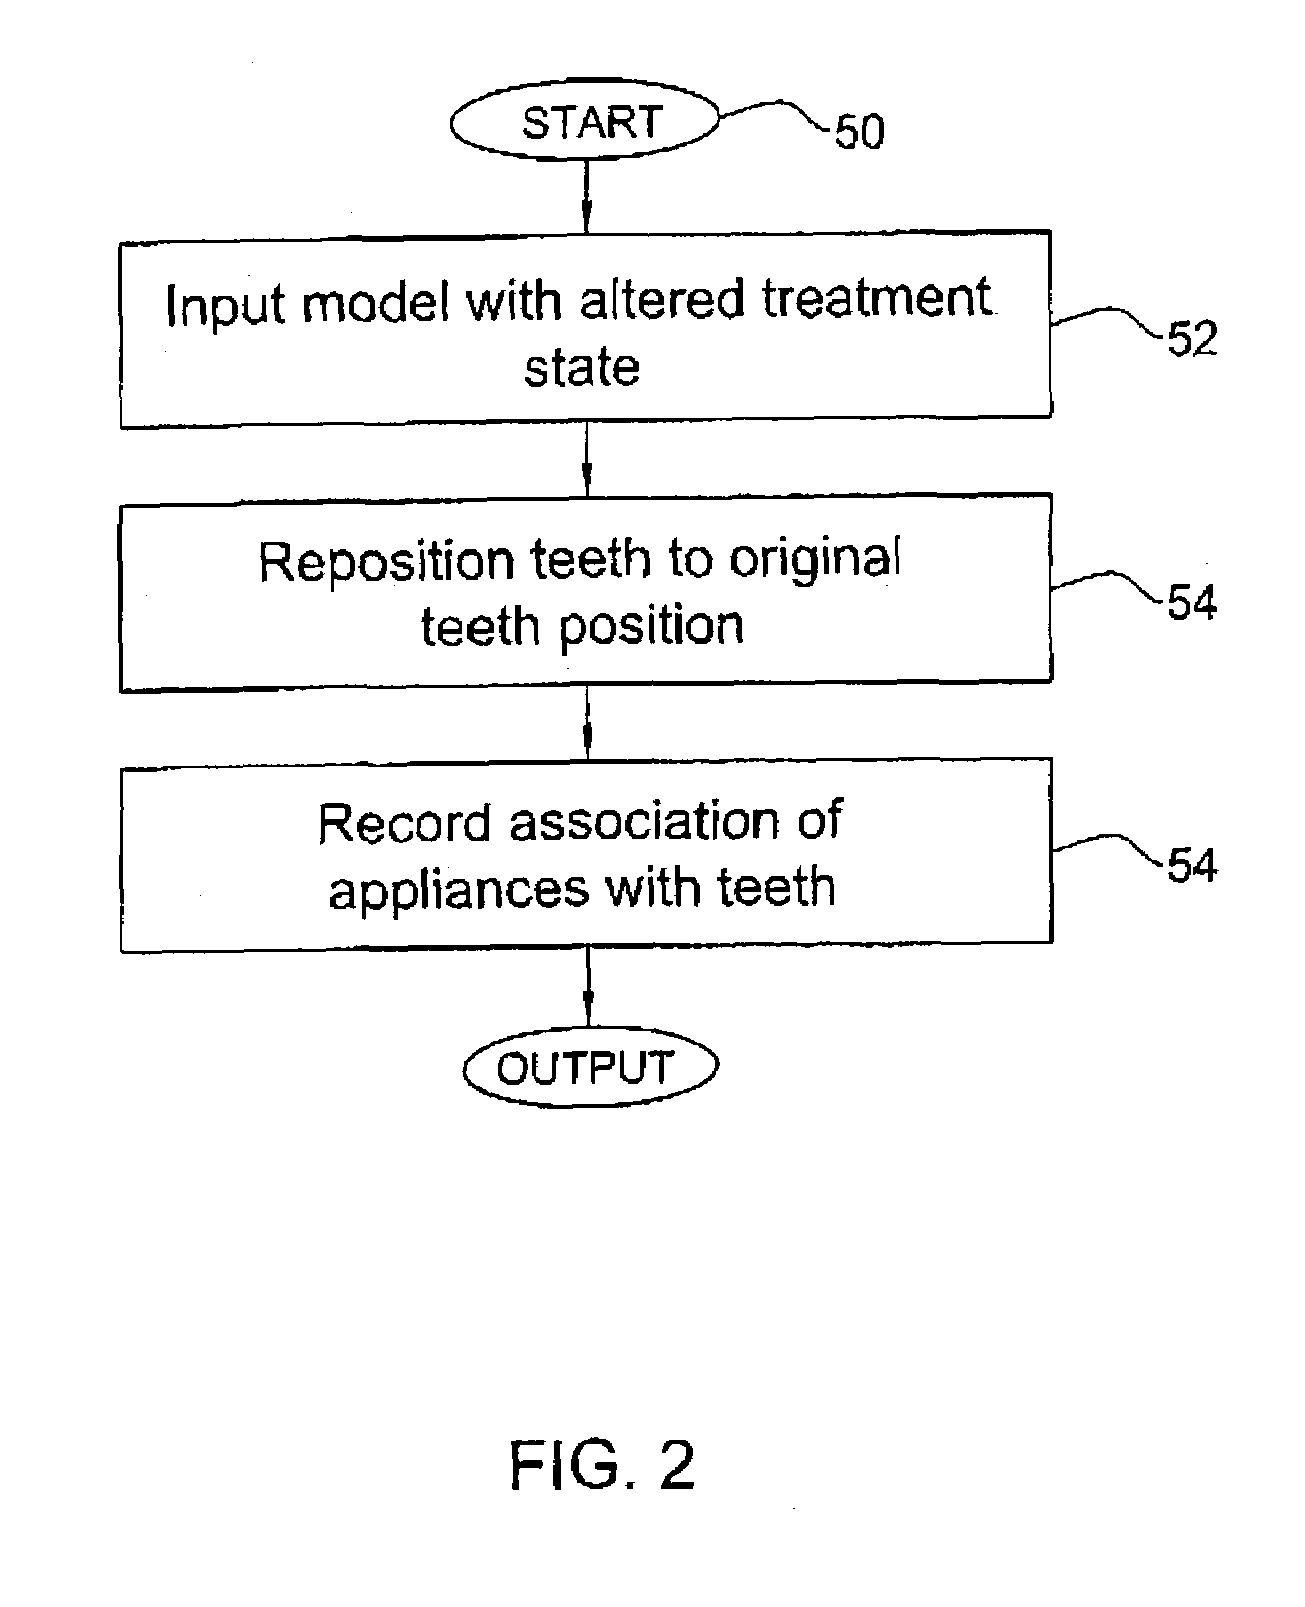 Method and system for assessing the outcome of an orthodontic treatment